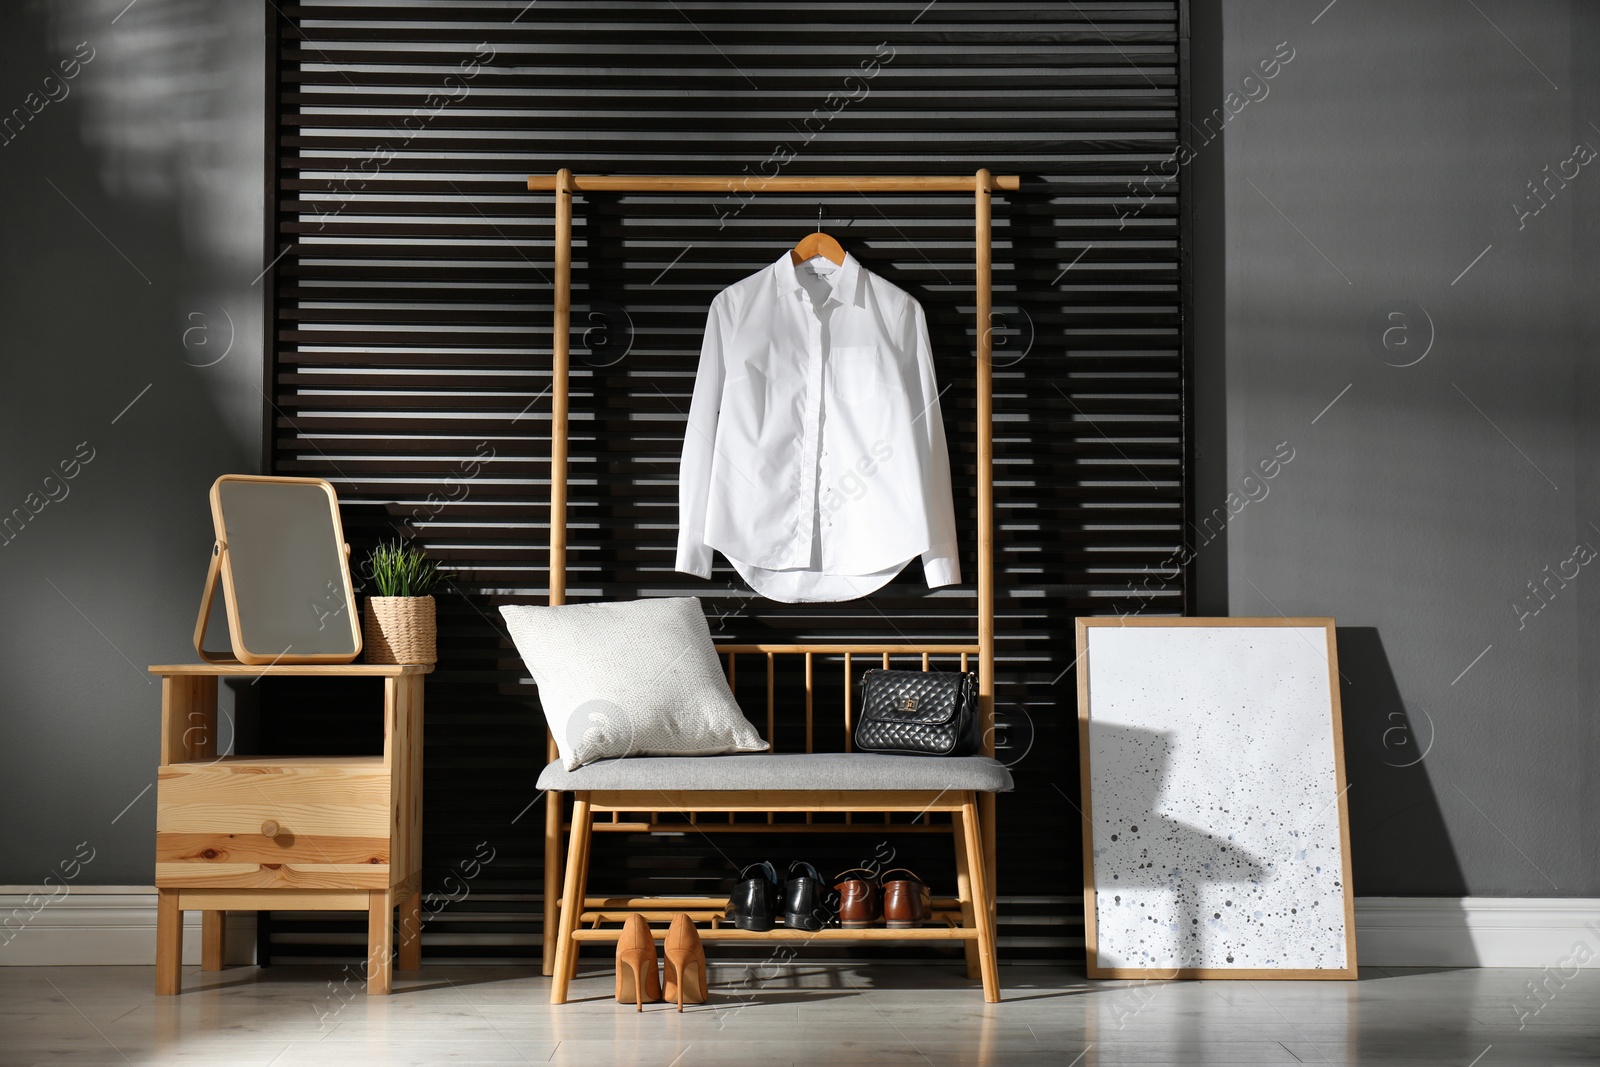 Photo of Hallway interior with modern furniture, mirror and hanging shirt